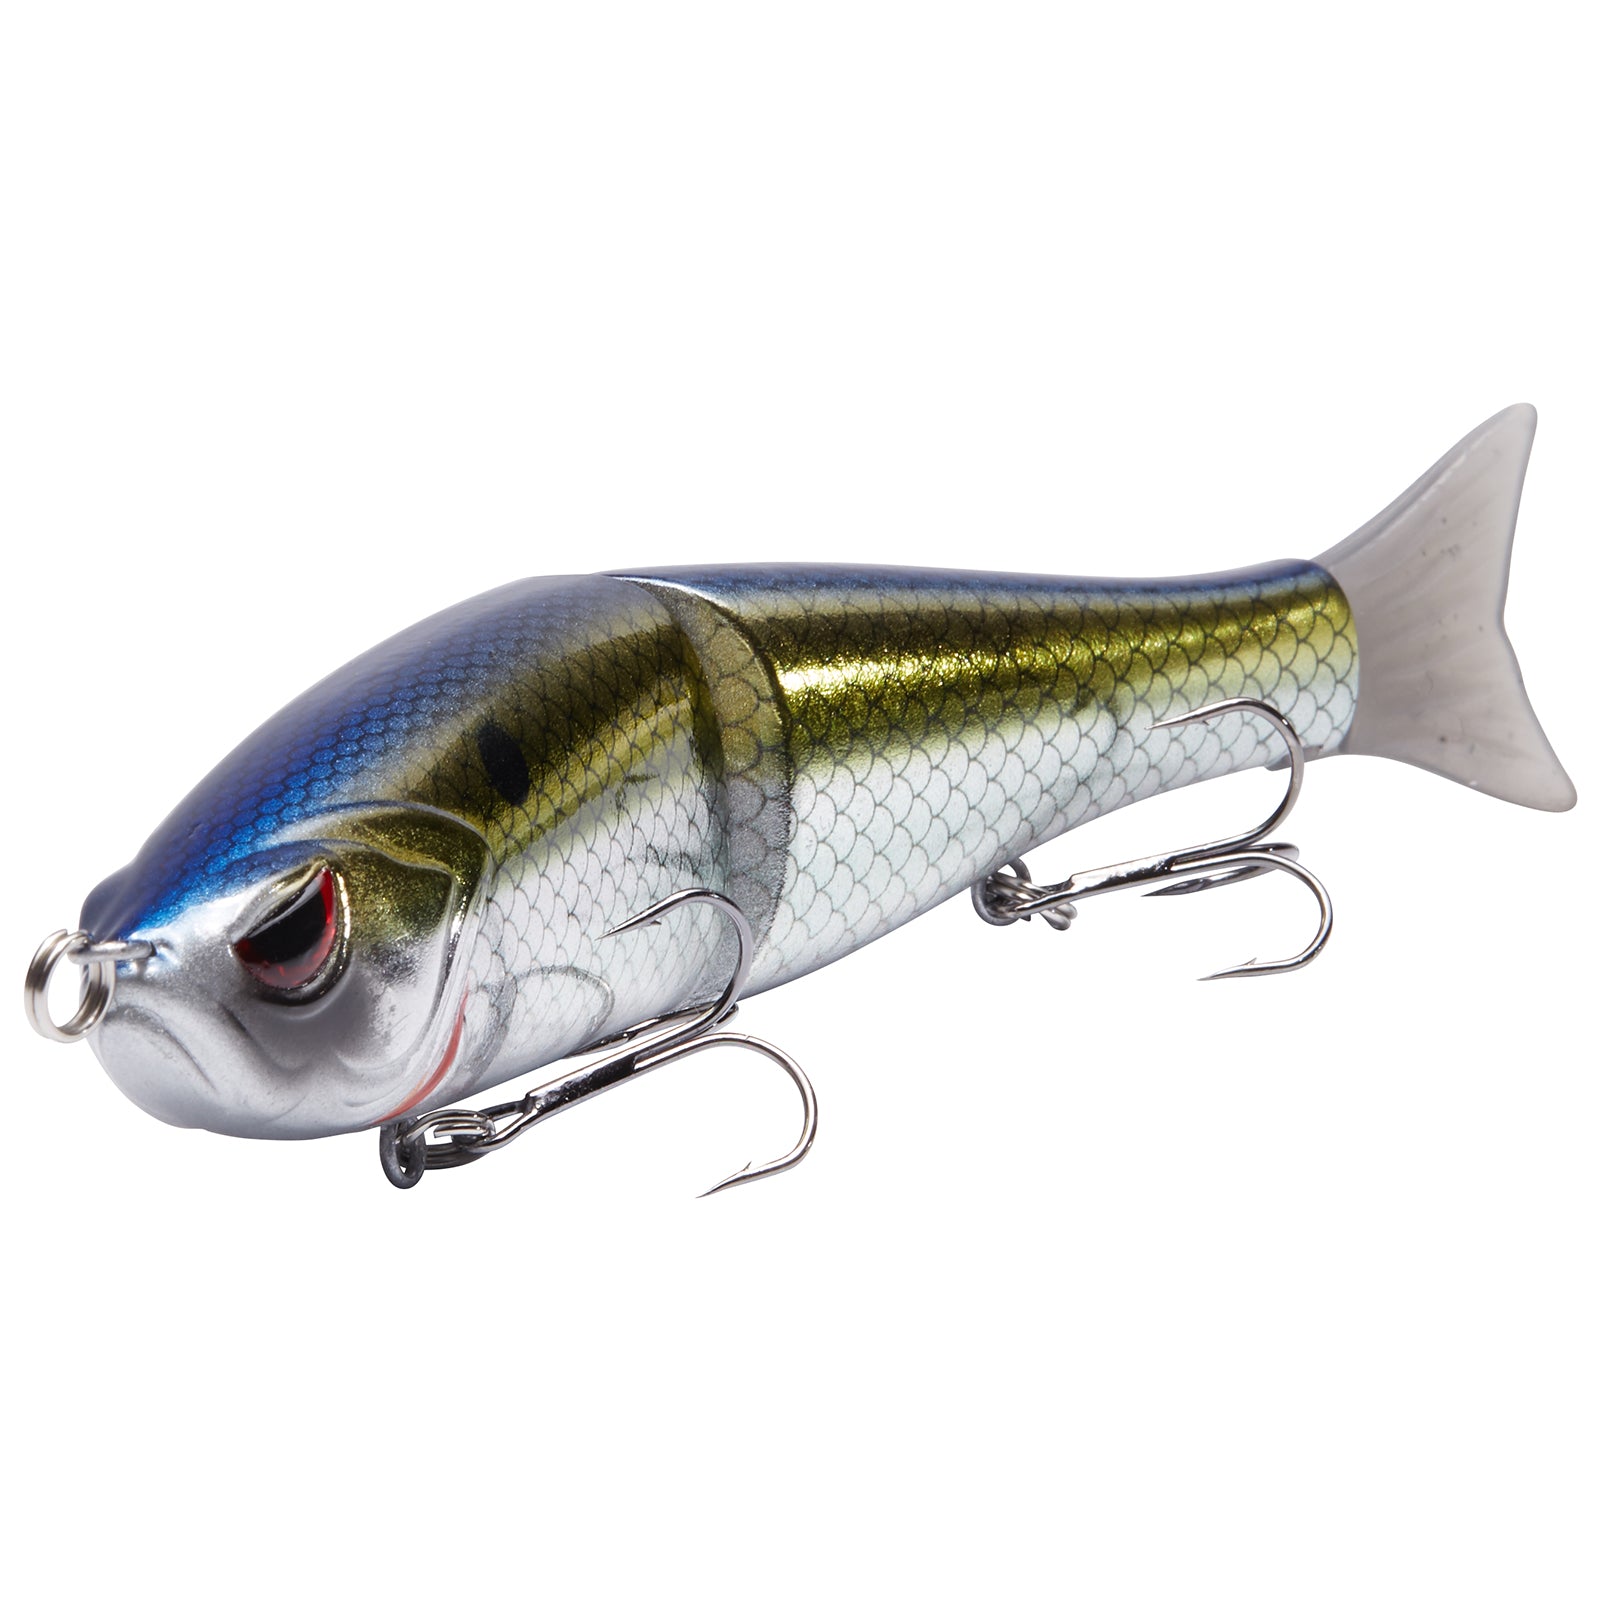  7 RF Glider Glide Bait Bass Musky Striper Fishing Big Lure  Multi Jointed Shad Trout Kits Slow Sinking (Baby Bass) : Sports & Outdoors